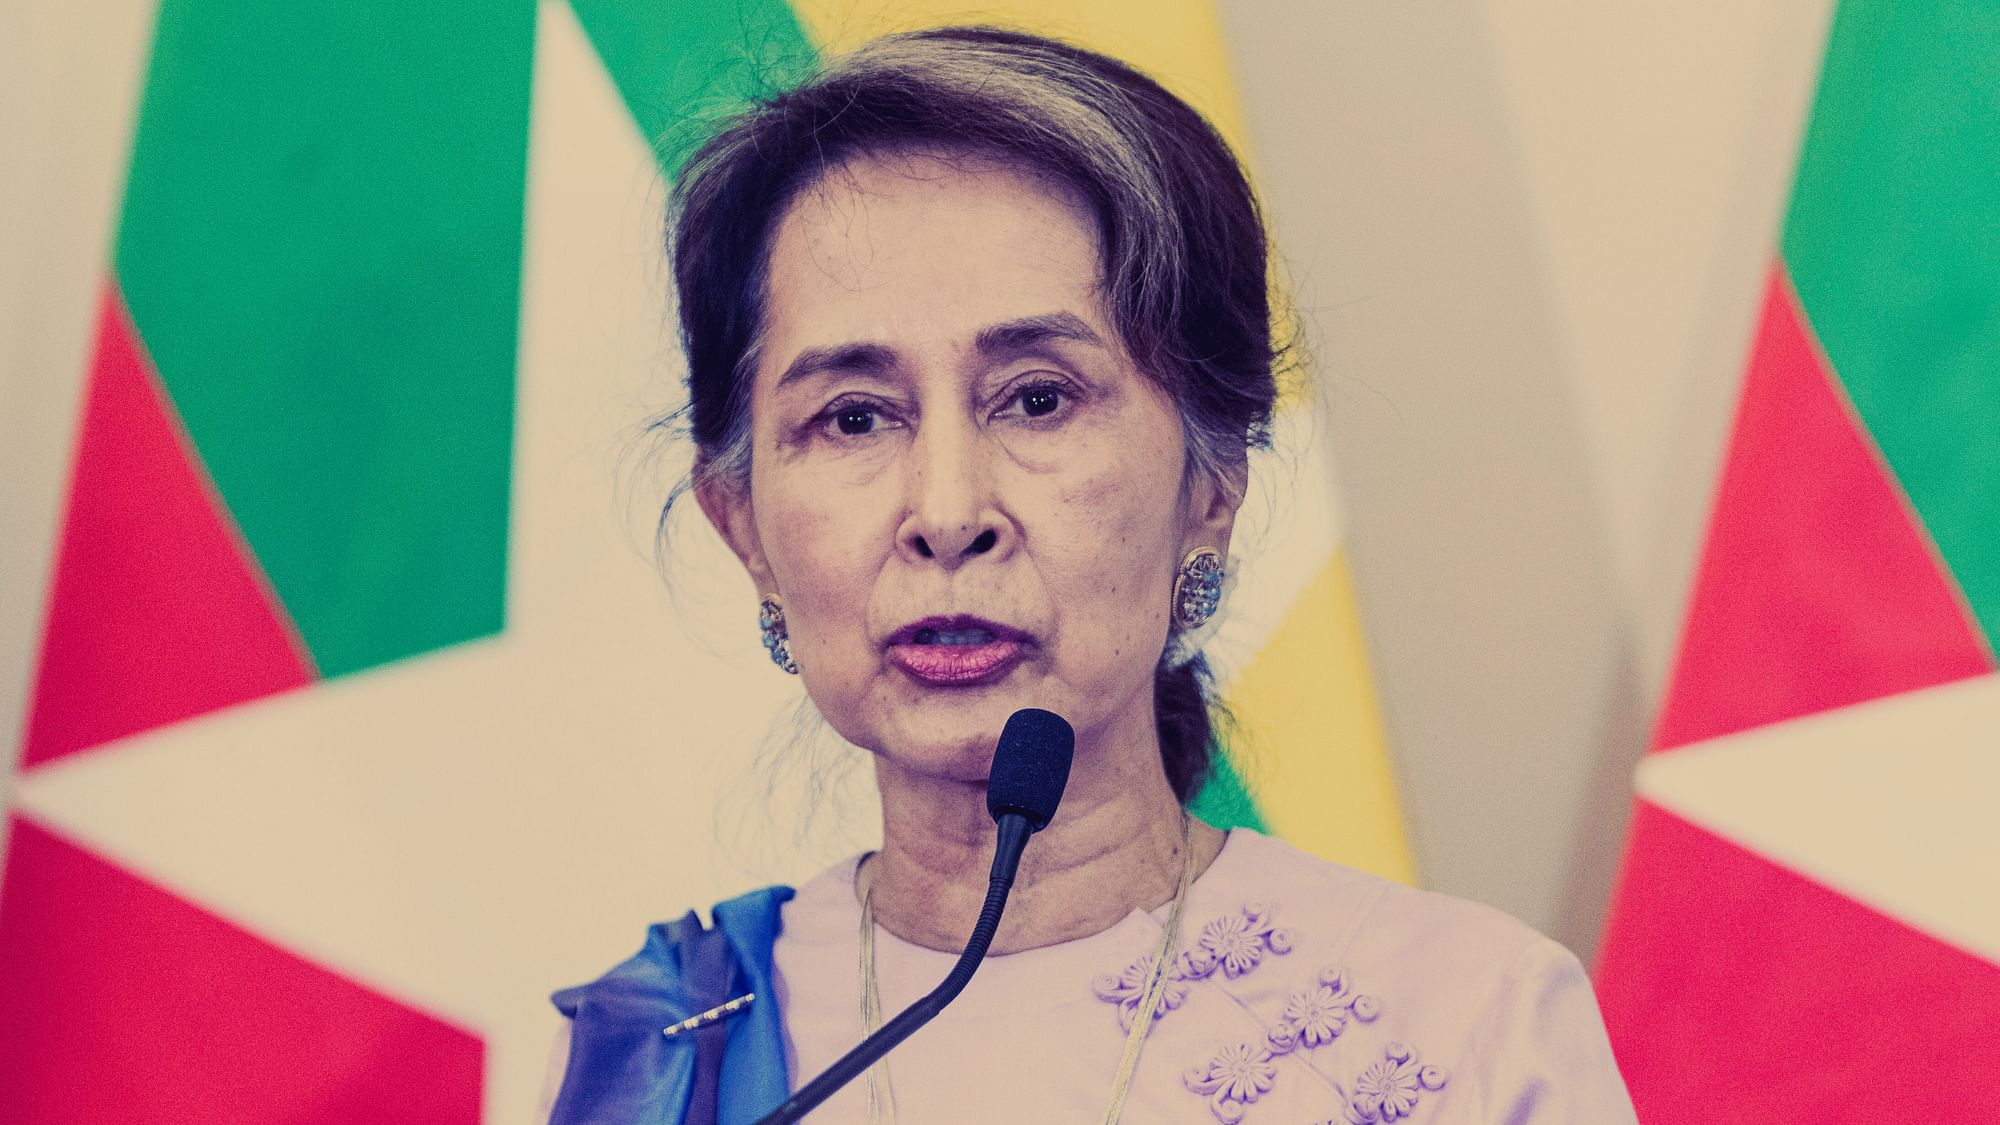 Image of Myanmar’s State Counsellor and iconic leader, Aung San Suu Kyi.&nbsp;